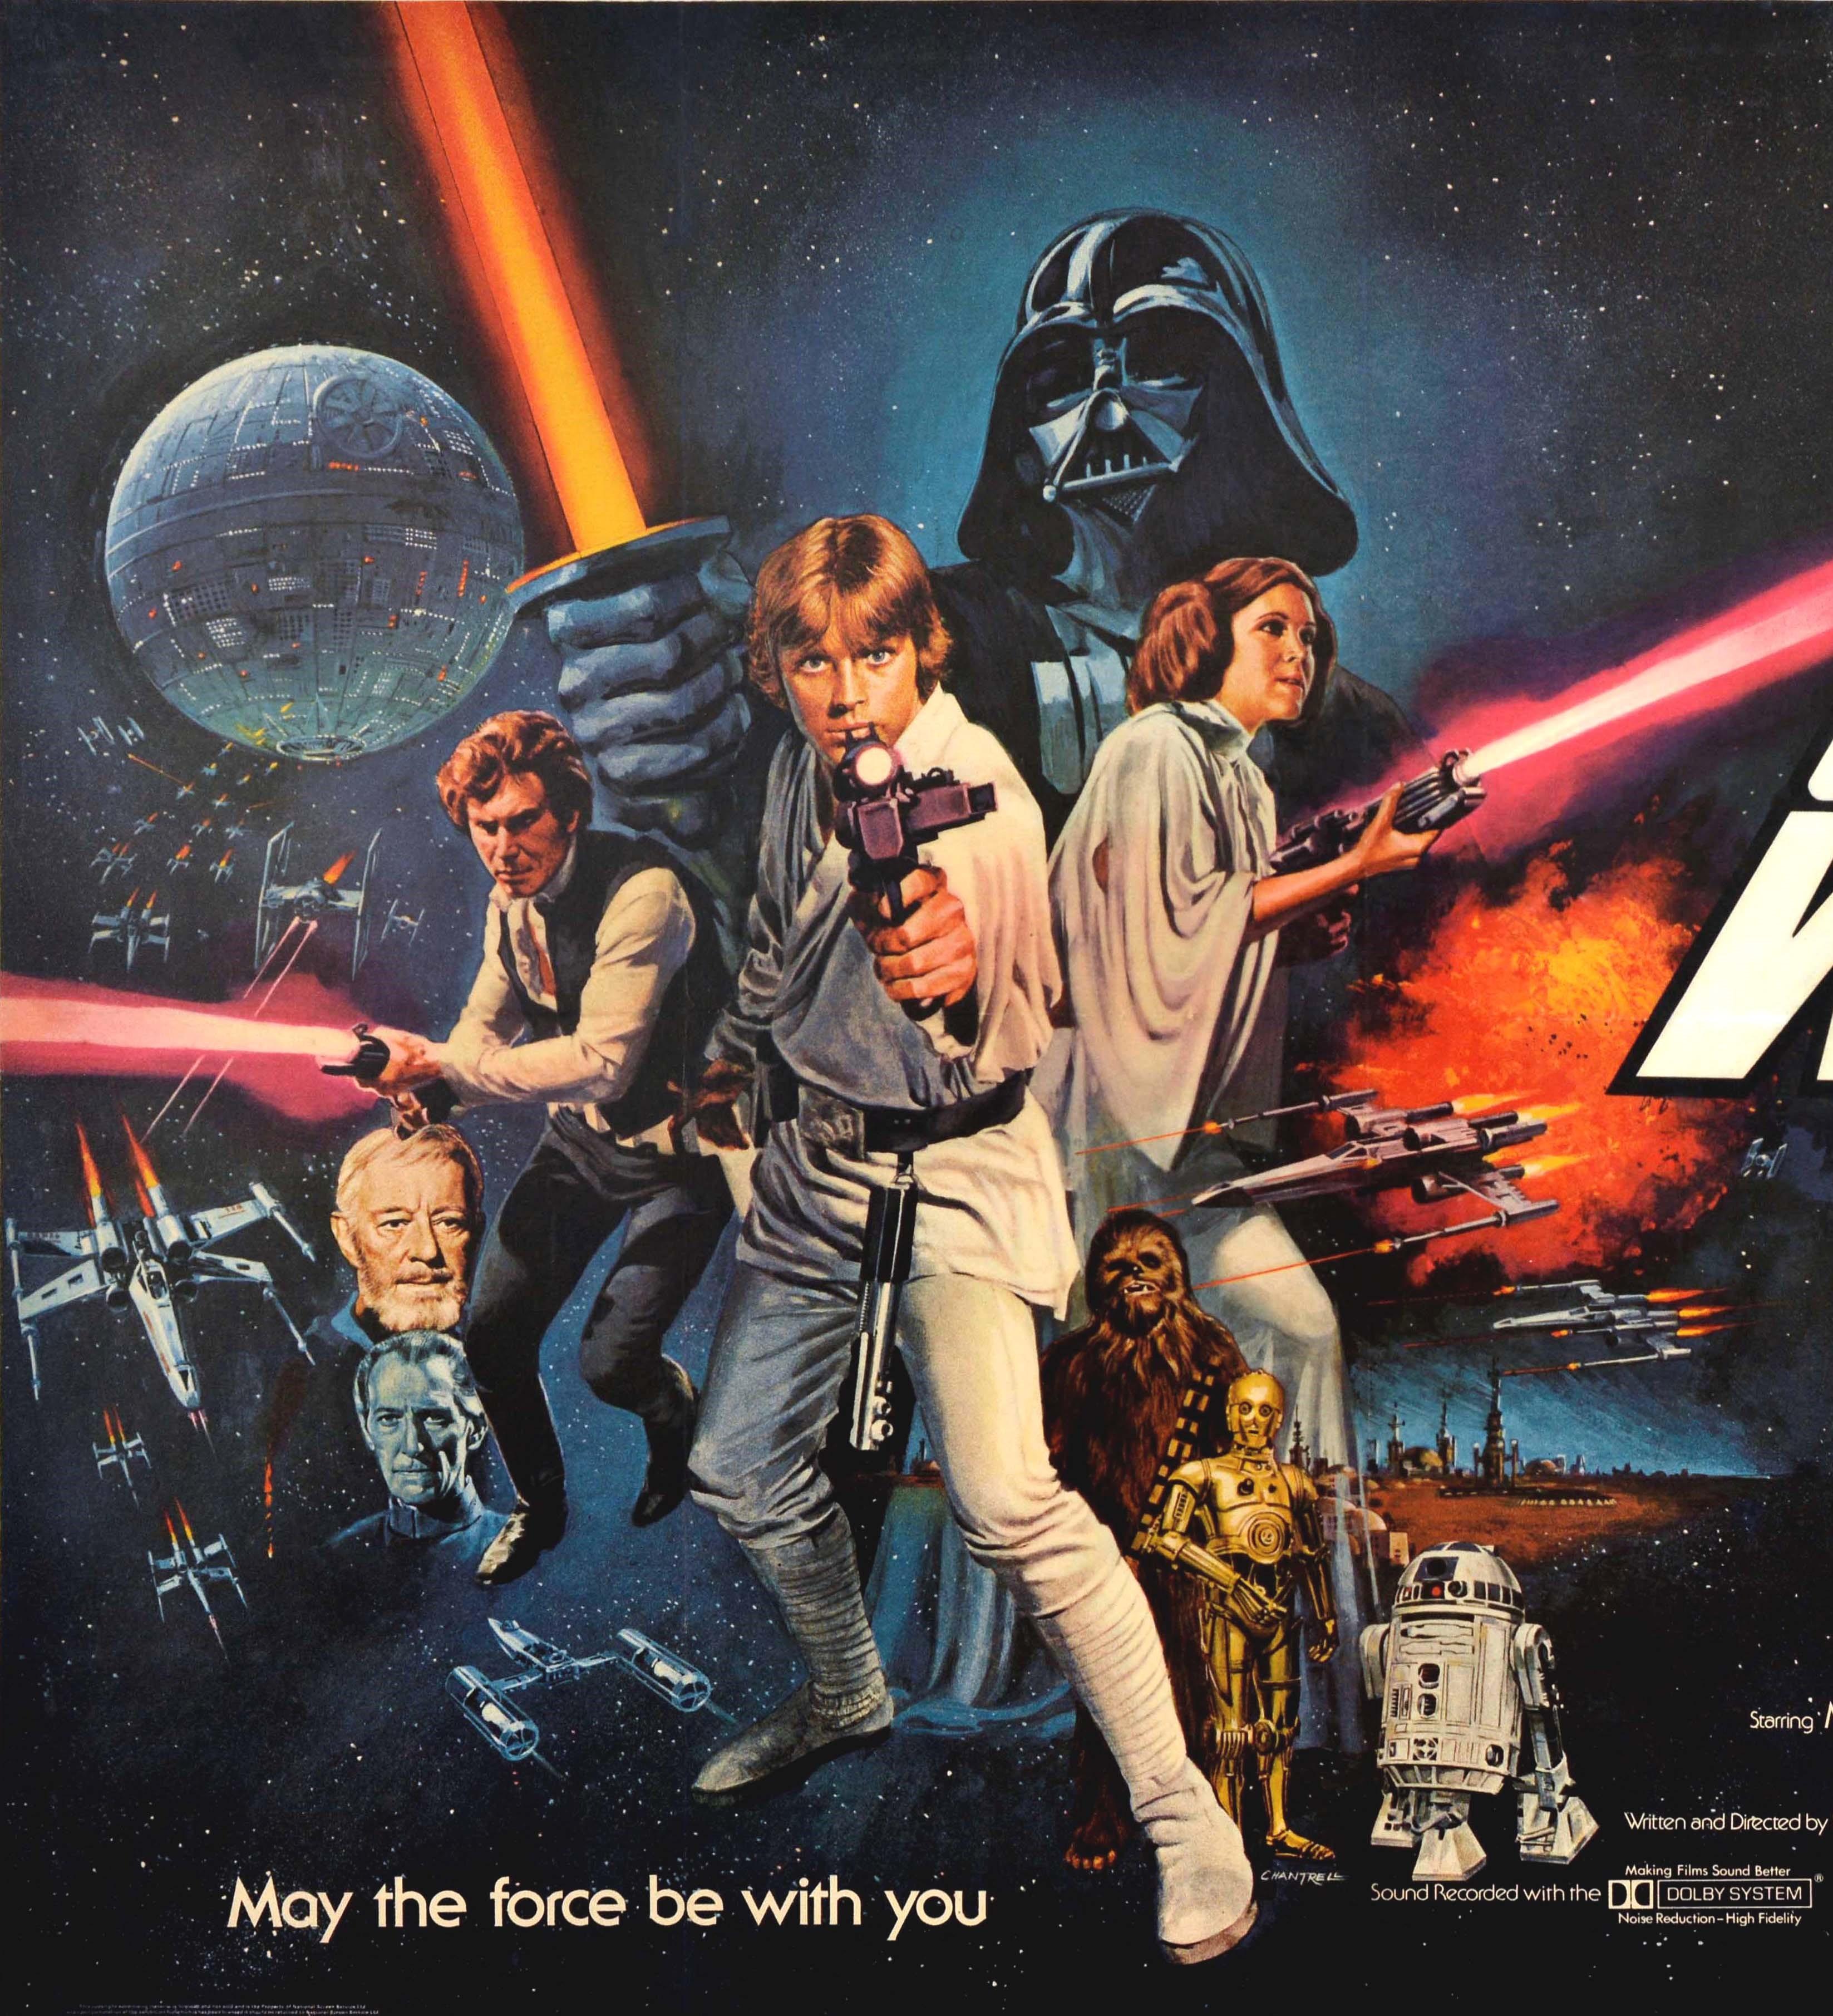 Original vintage movie poster for the first release of the iconic Star Wars saga by George Lucas starring Mark Hamill as Luke Skywalker, Harrison Ford as Han Solo, Carrie Fisher as Princess Leia, Alec Guinness as Obi Wan-Kenobi, Anthony Daniels and